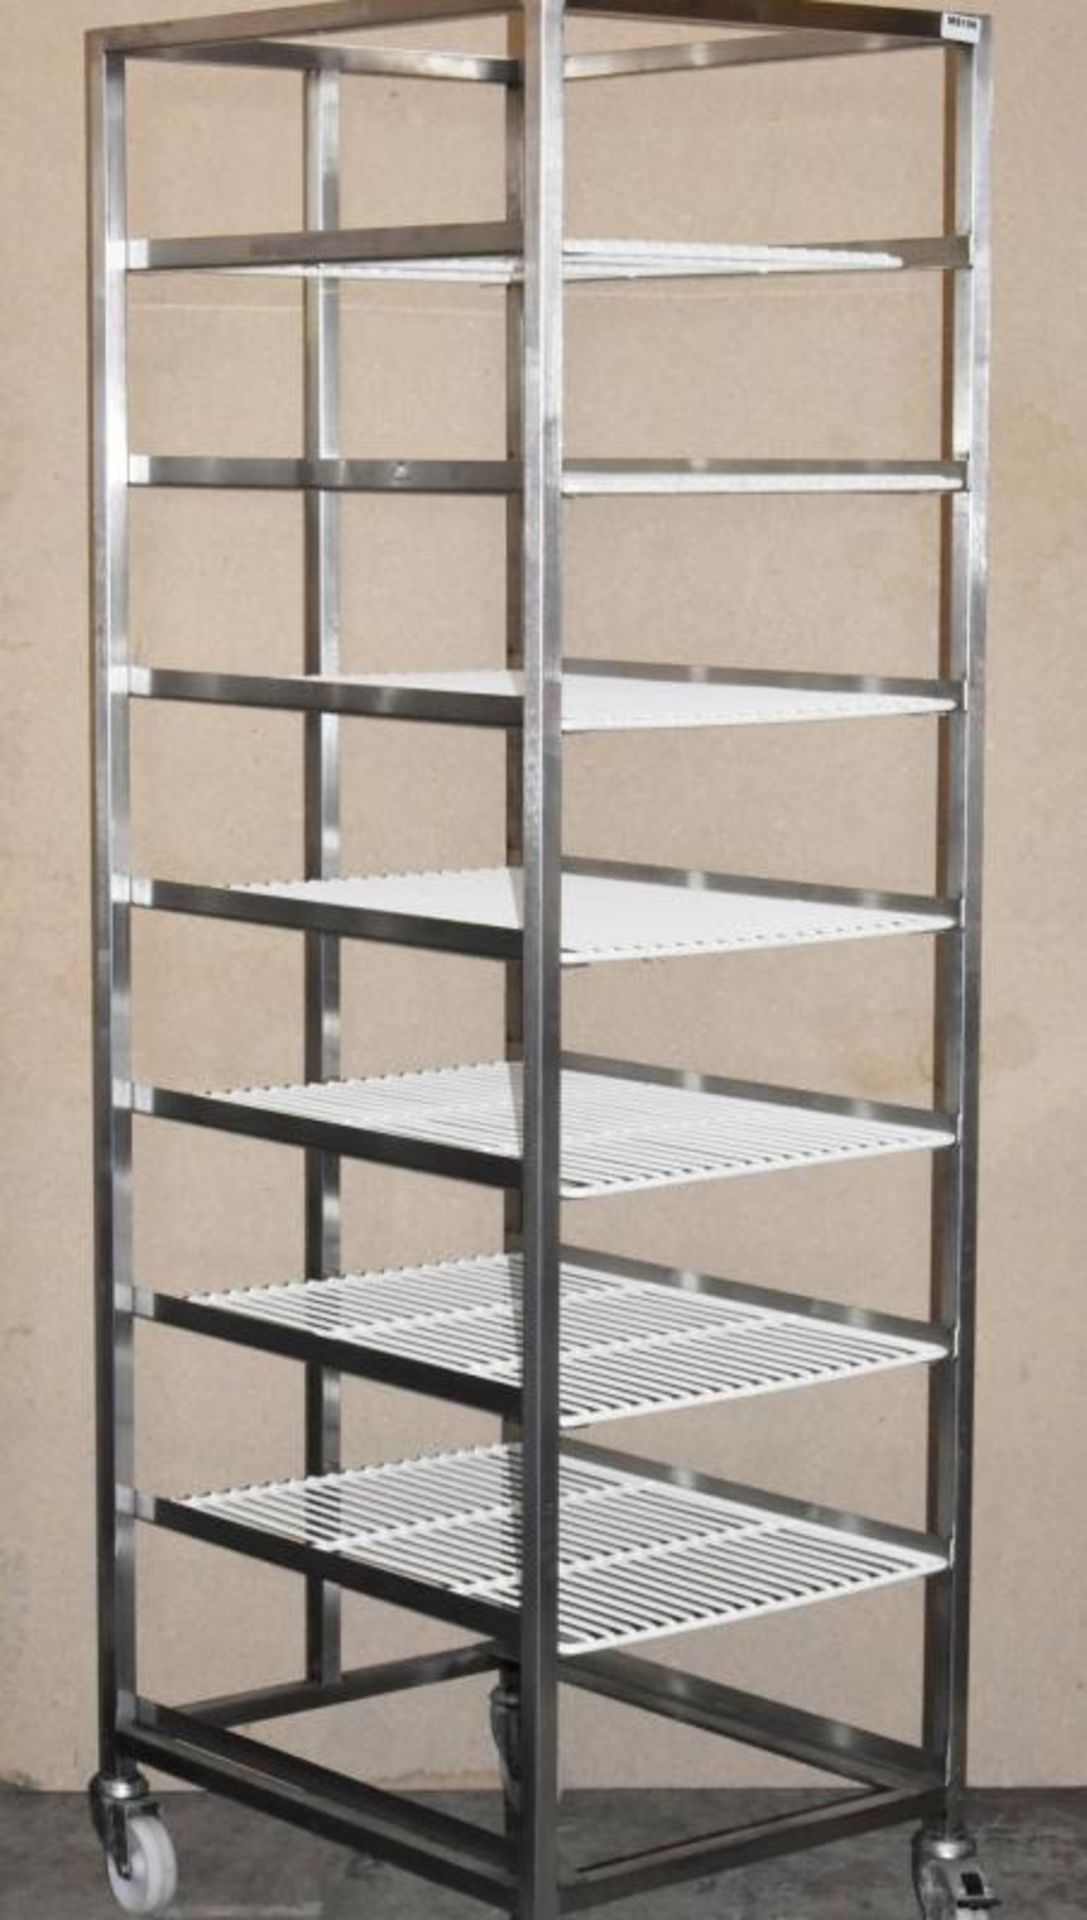 1 x Stainless Steel 8 Tier Mobile Shelf Unit For Commercial Kitchens With White Coated Wire Shelves - Image 9 of 11